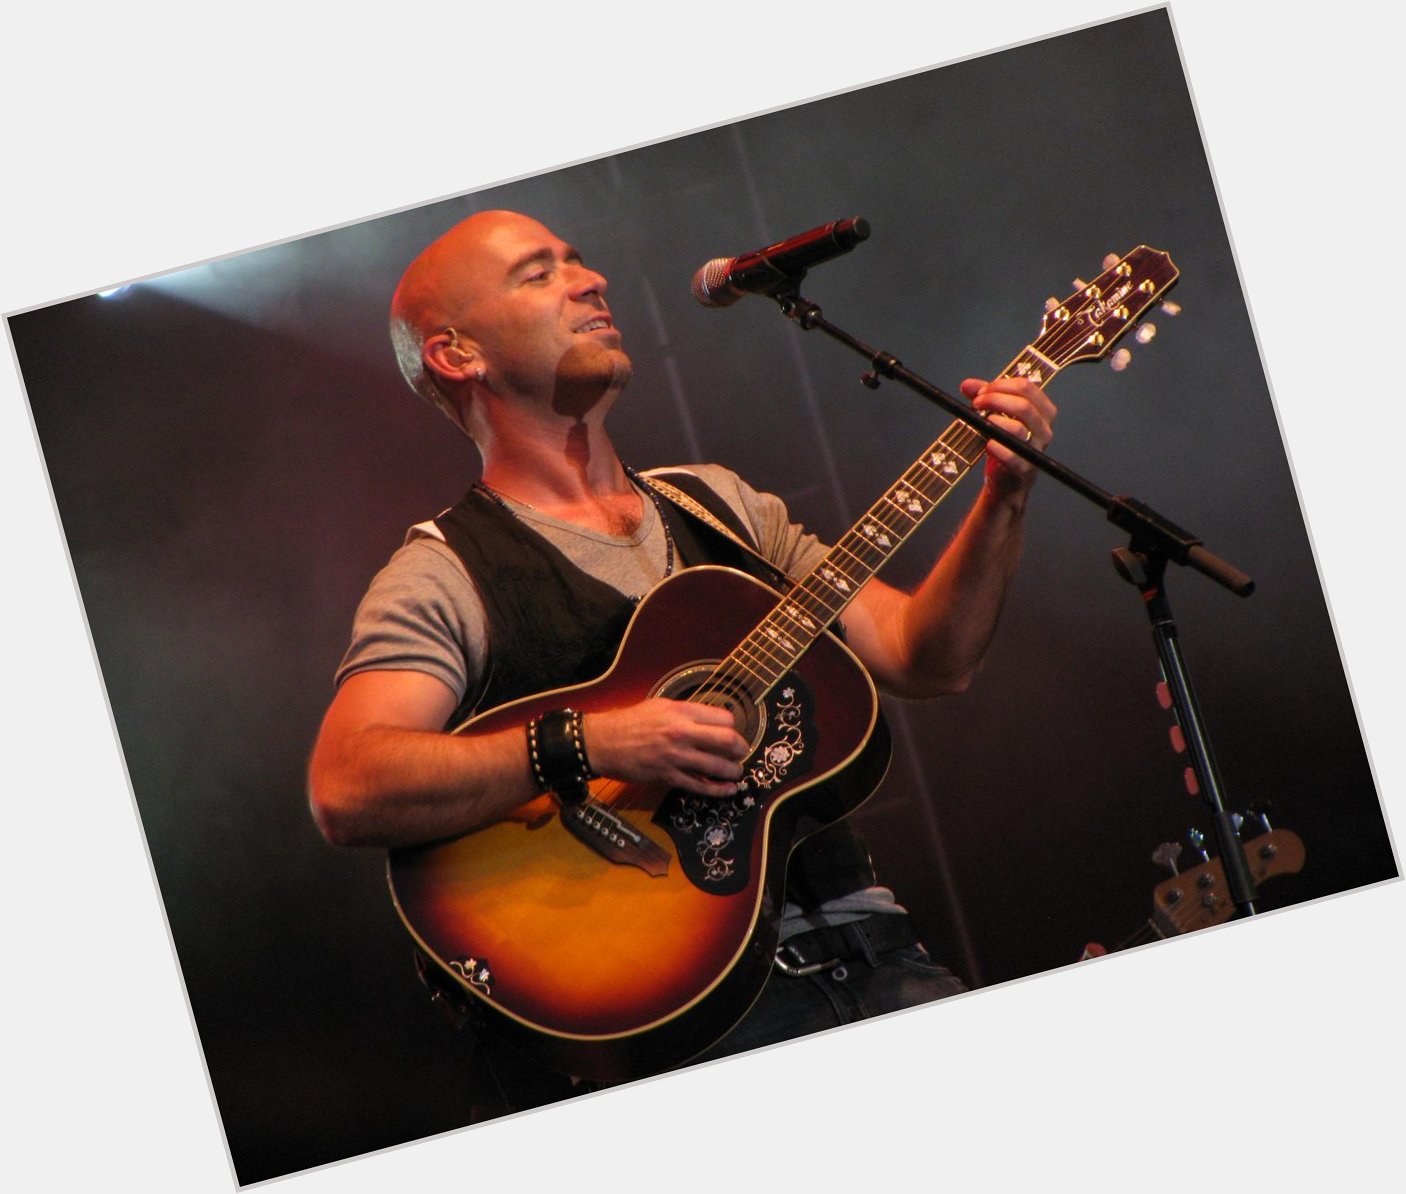 A very happy 44th birthday to recent Capitol performer and former lead-man for LIVE, Ed Kowalczyk! 